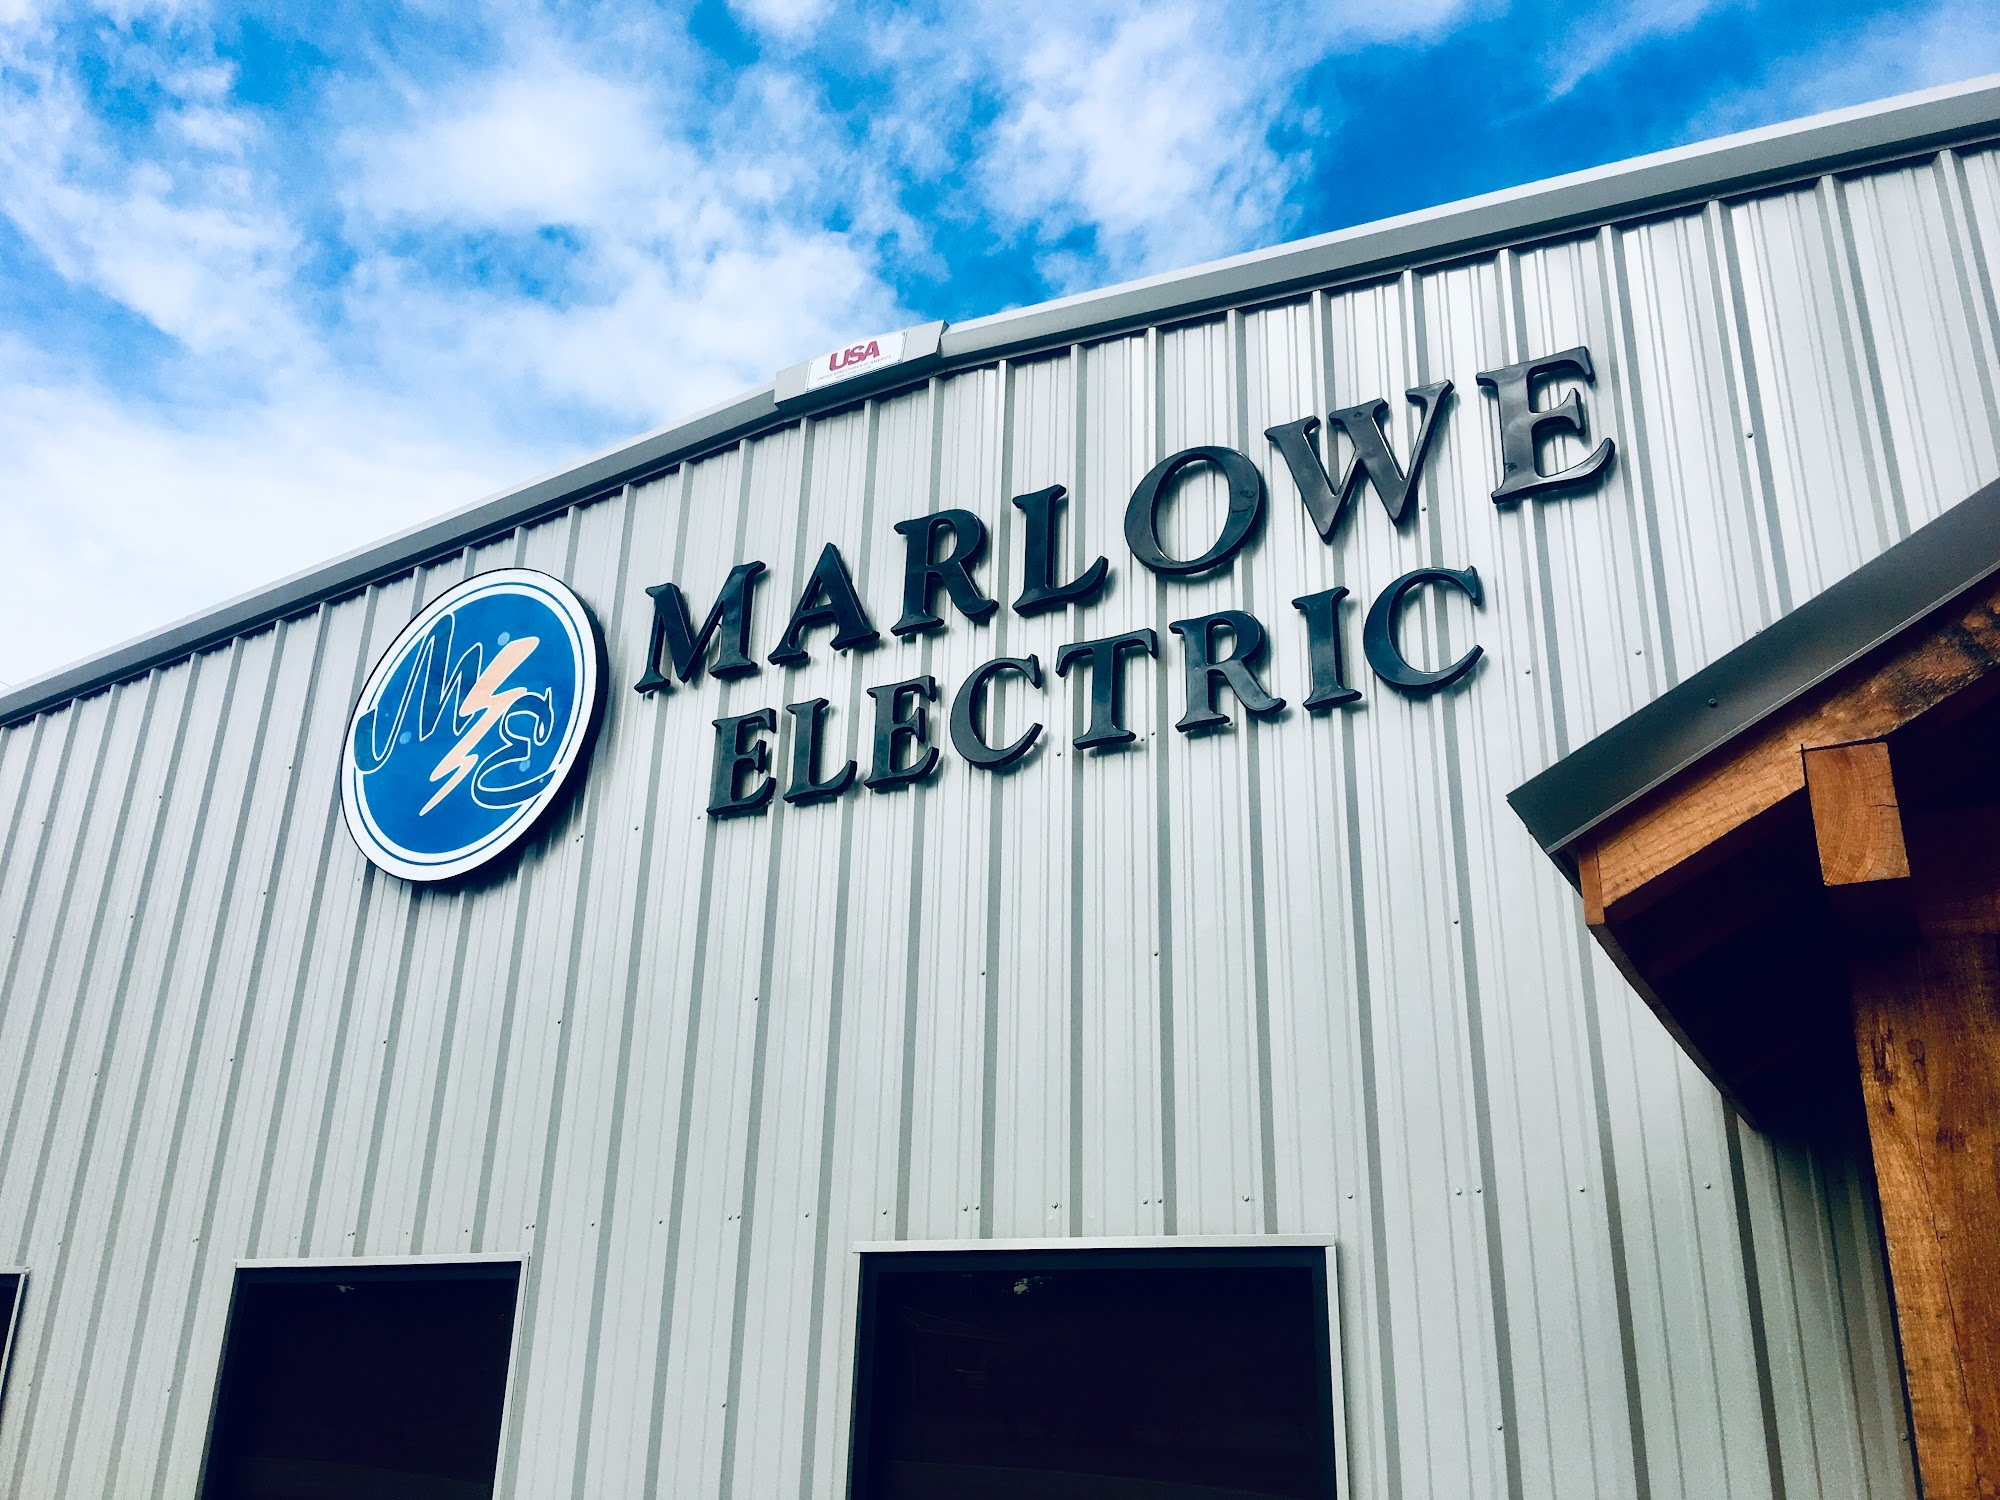 Marlowe Electric Heating & Air Conditioning 2210 S Main St, Linden Alabama 36748